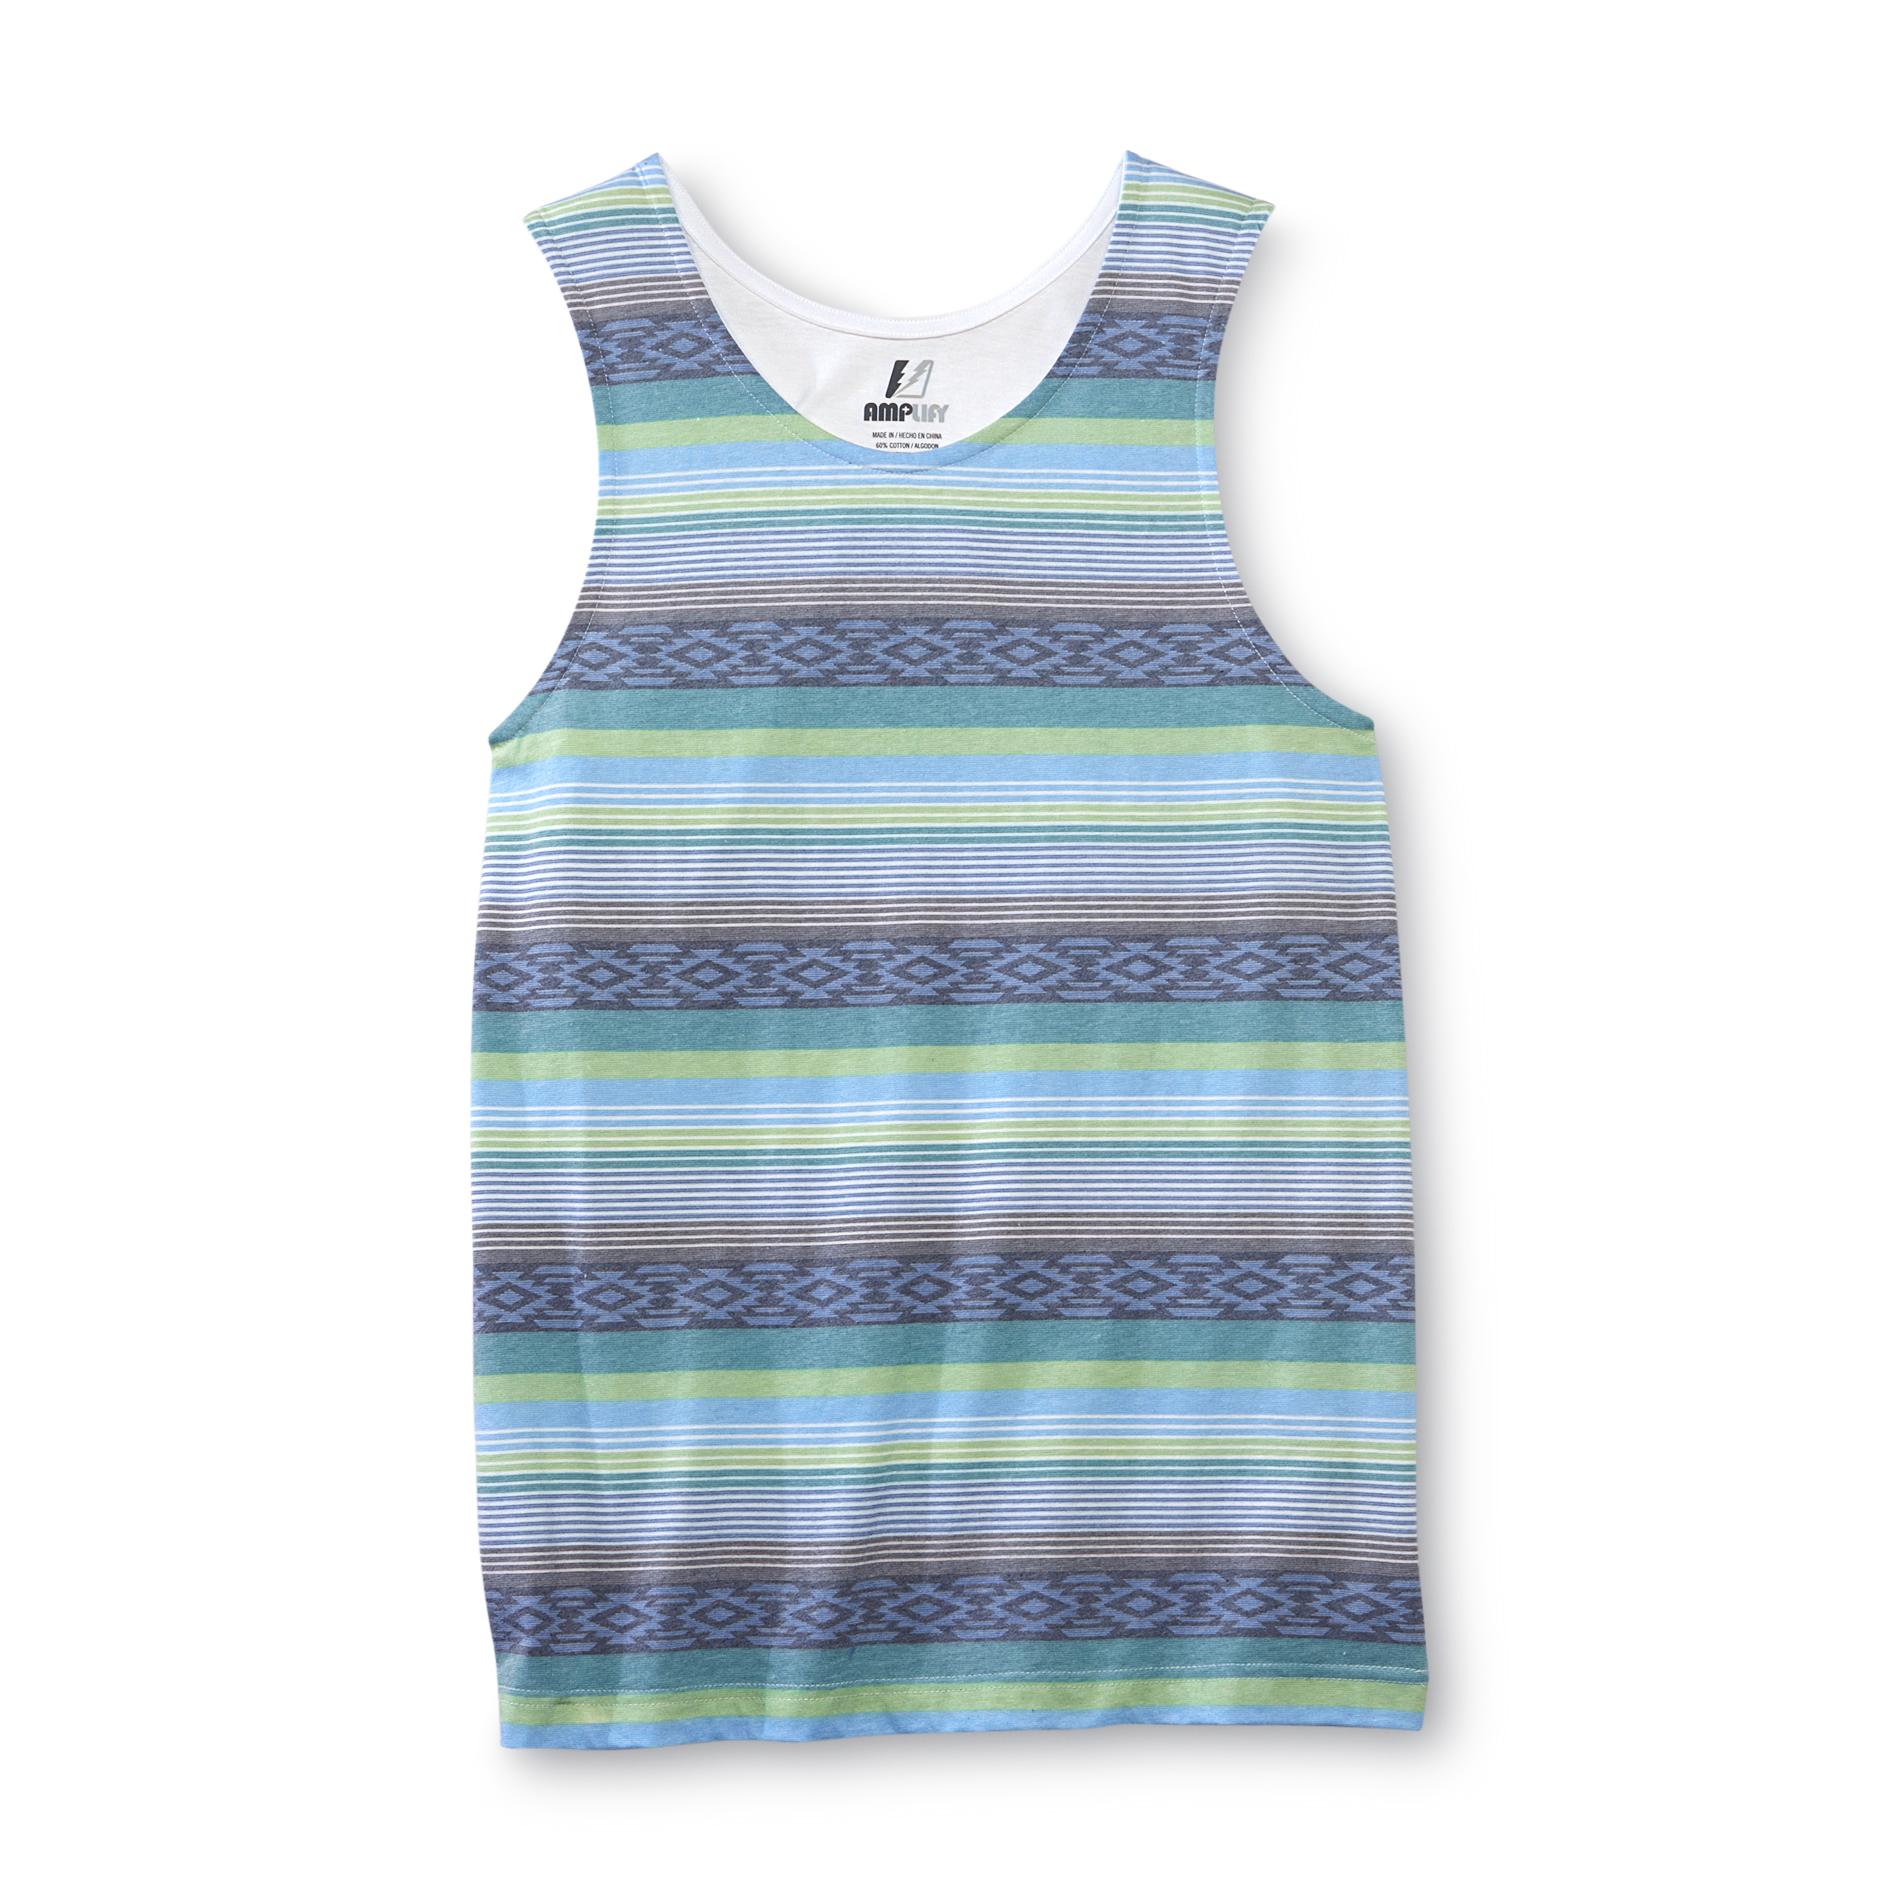 Amplify Young Men's Tank Top - Tribal & Striped